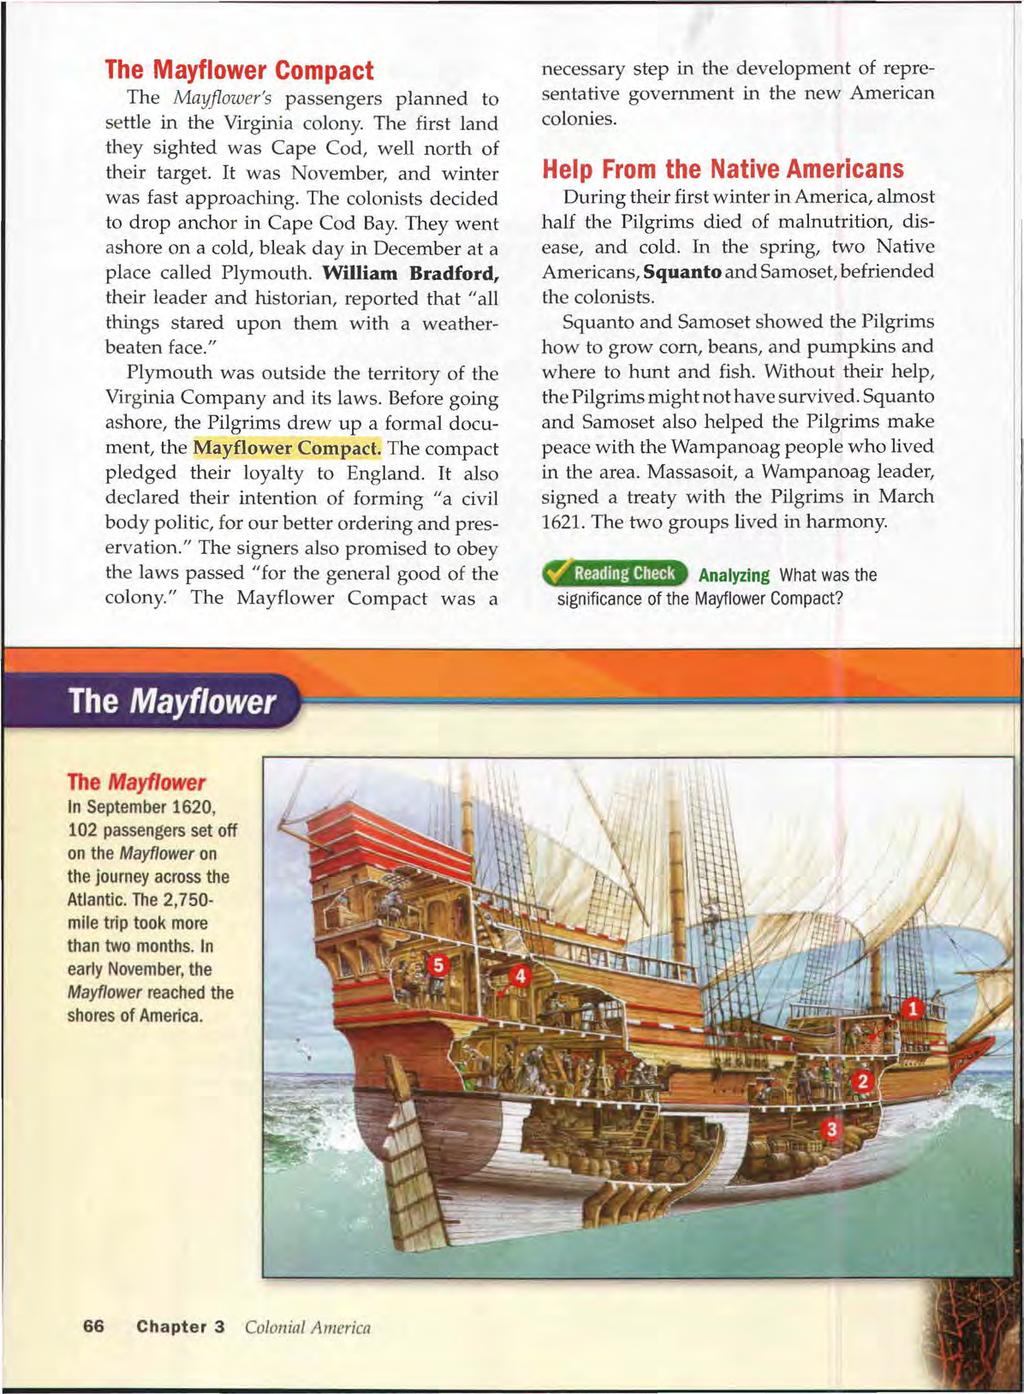 The Mayflower Compact The Mayflower's passengers planned to settle in the Virginia colony. The first land they sighted was Cape Cod, well north of their target.